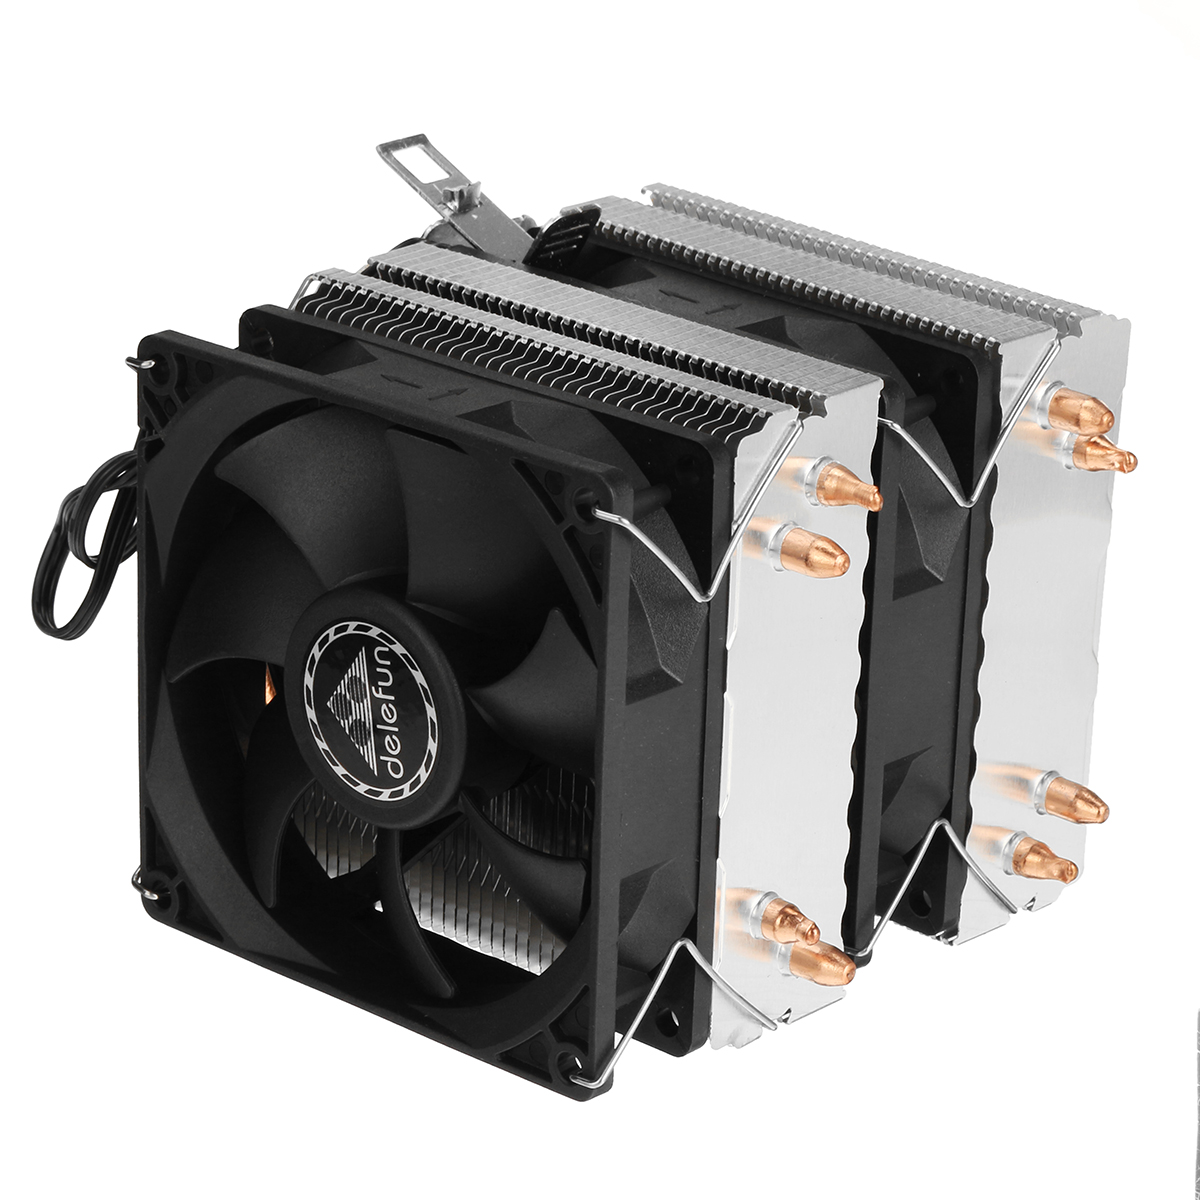 Find Delefun CPU Fan 3 Pin Four Heat Pipes Silent Computer Case Cooling Fan CPU Heatsink Cooler with Mounting Bracket for AMD 2011 X79 X99 299 for Sale on Gipsybee.com with cryptocurrencies